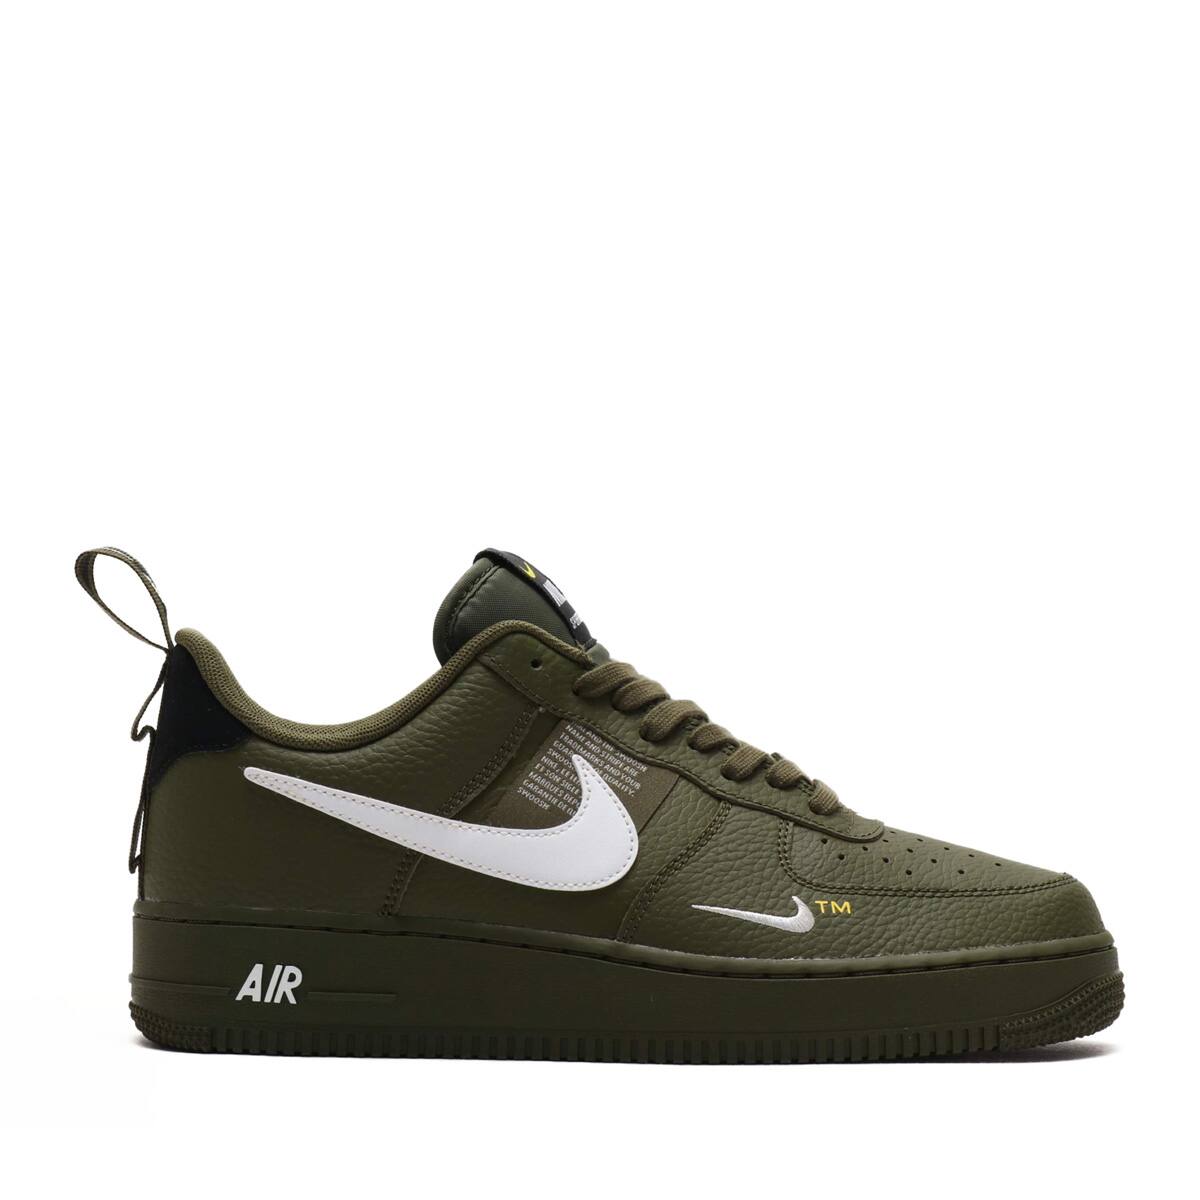 NIKE AIR FORCE 1 '07 LV8 UTILITY OLIVE 